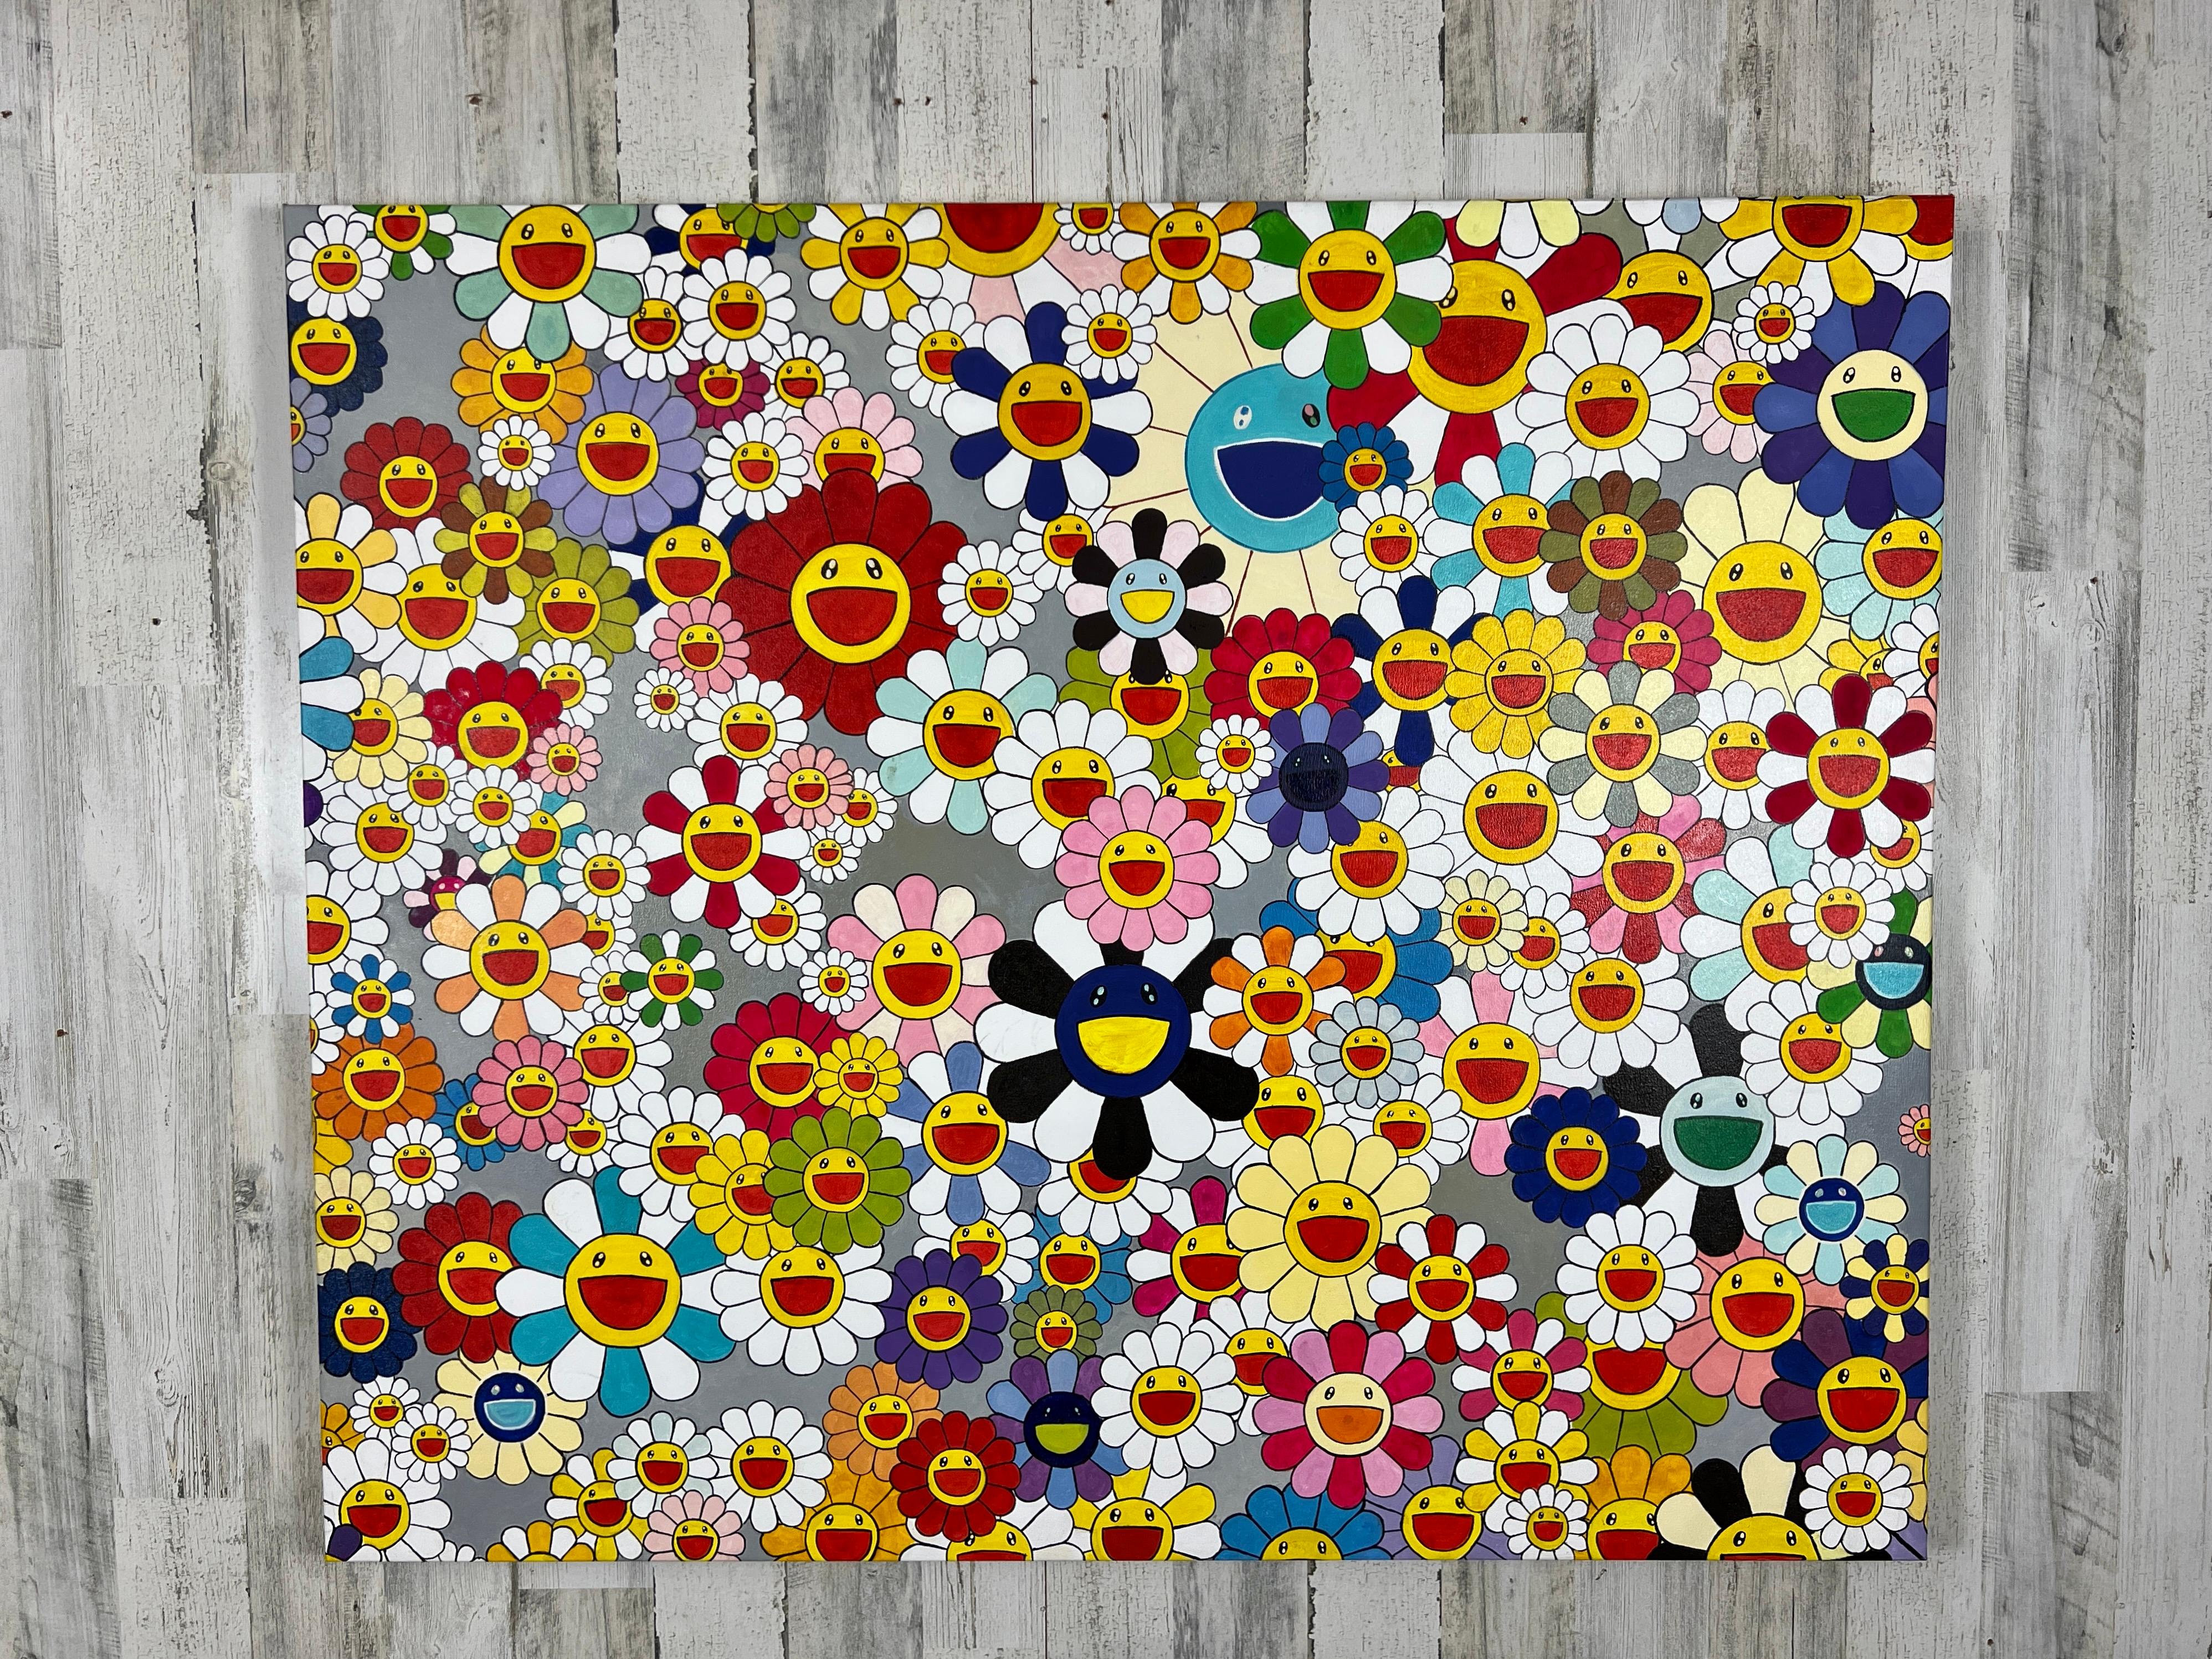 Oil on canvas in the style of Takashi Murakami . Very colorful pop art that can brighten any room. It is signed on the back please see pictures